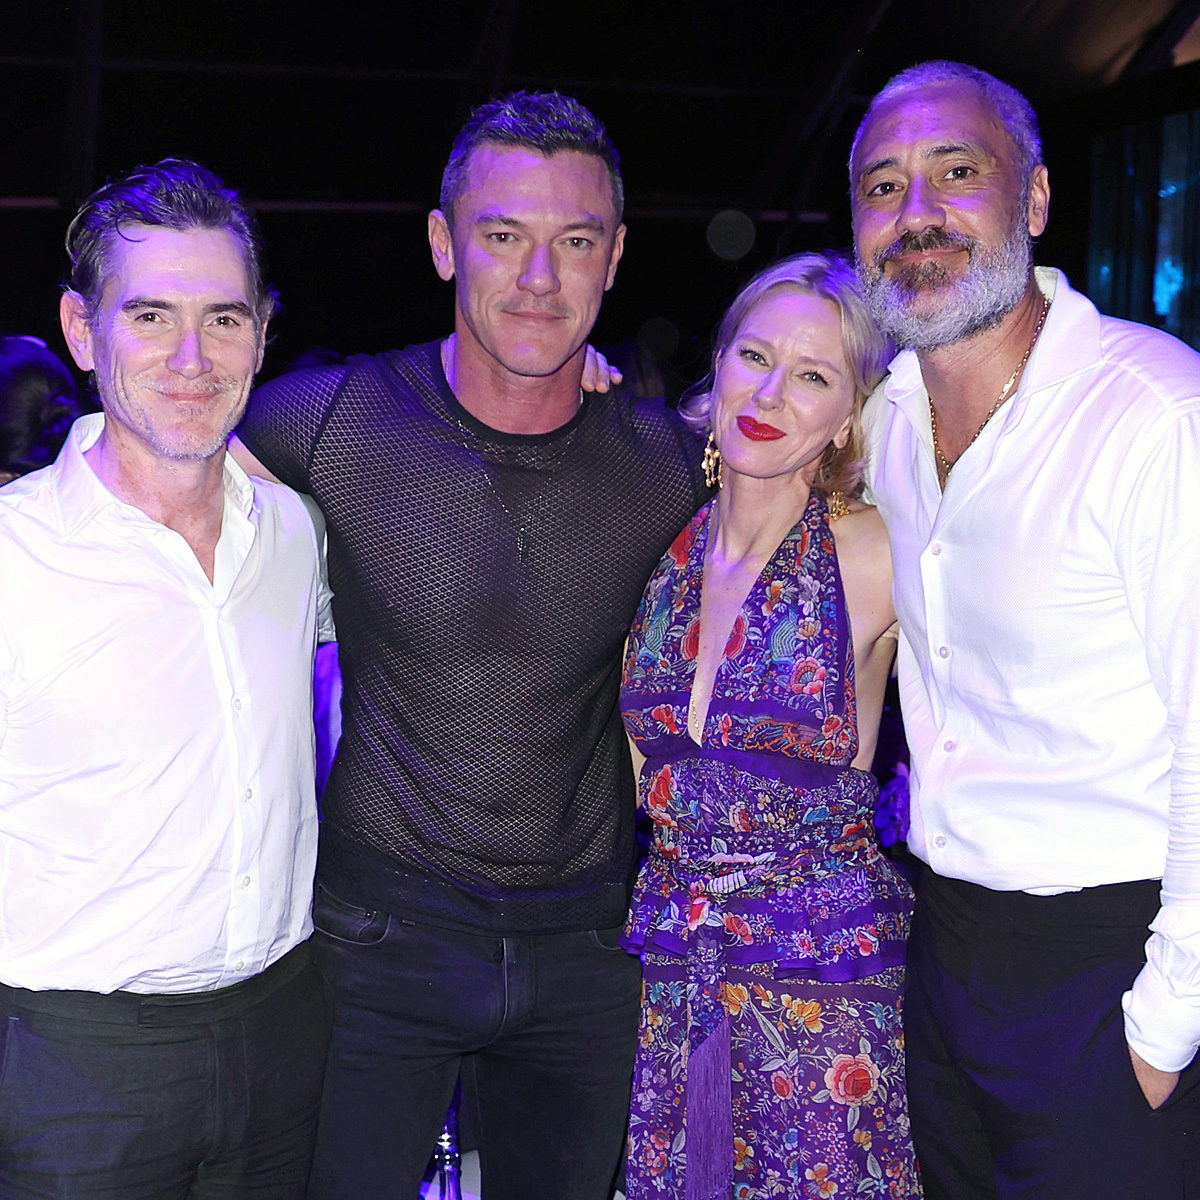 Leonardo DiCaprio, A-listers, and billionaires party in St. Barts